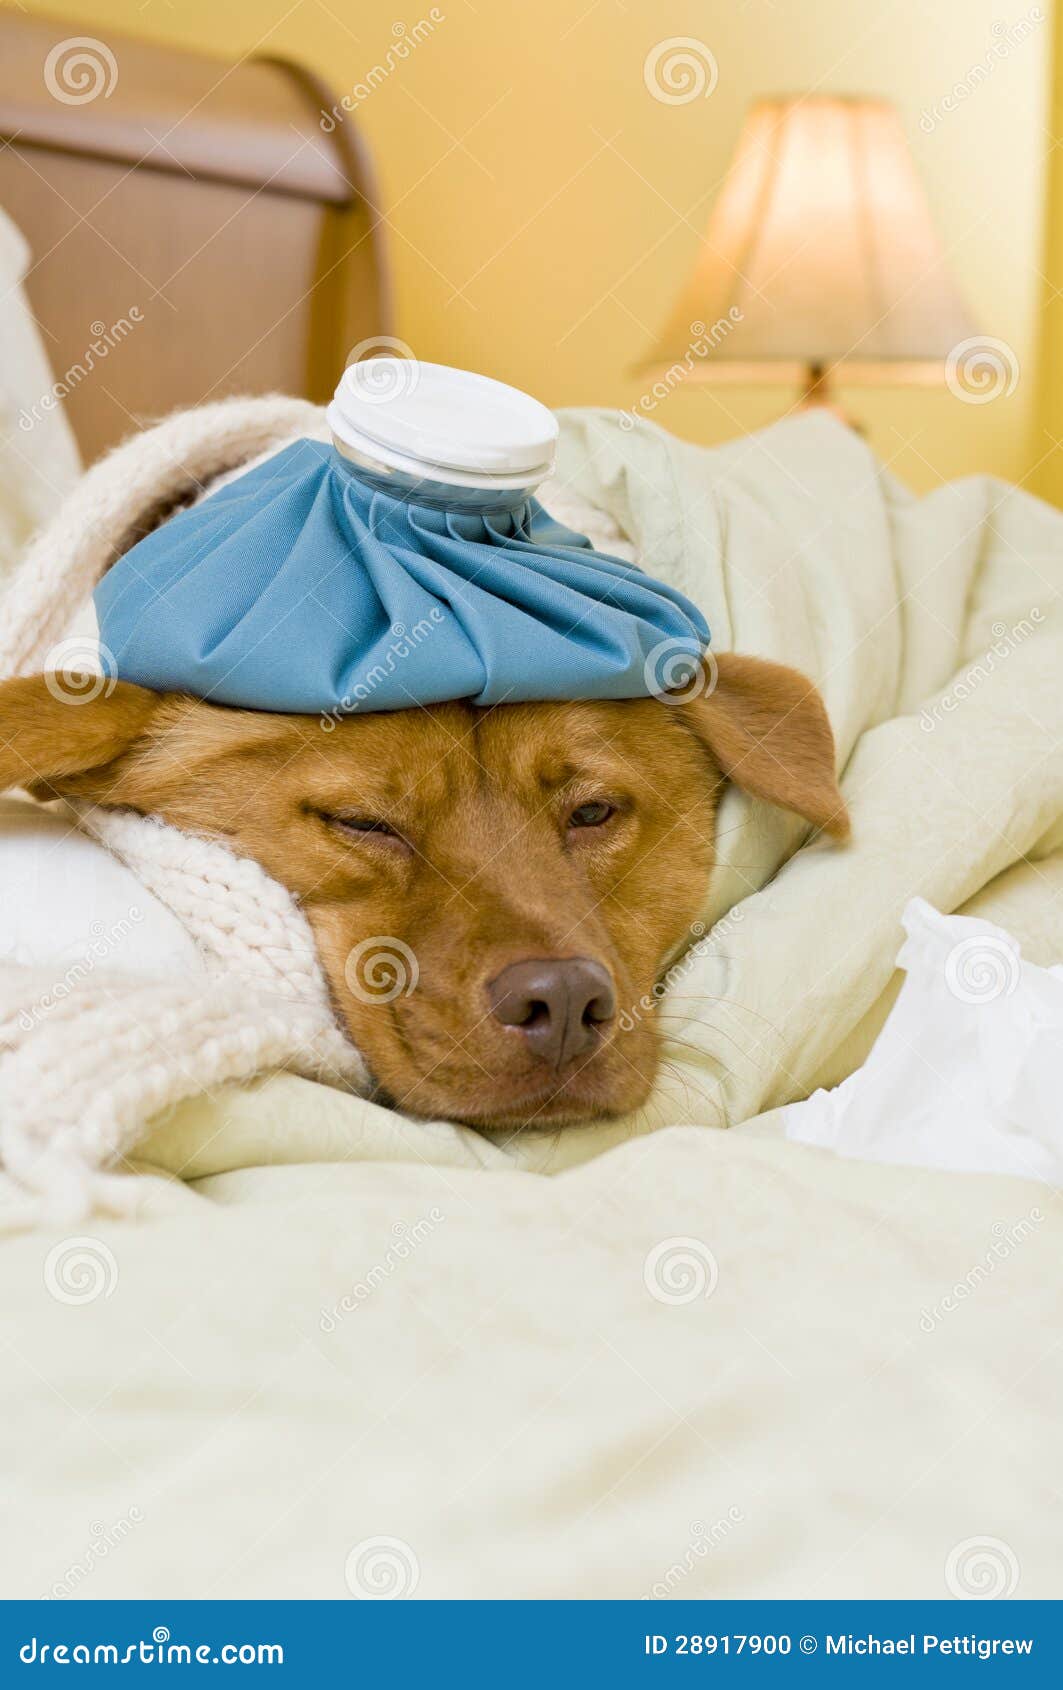 dog sick in bed